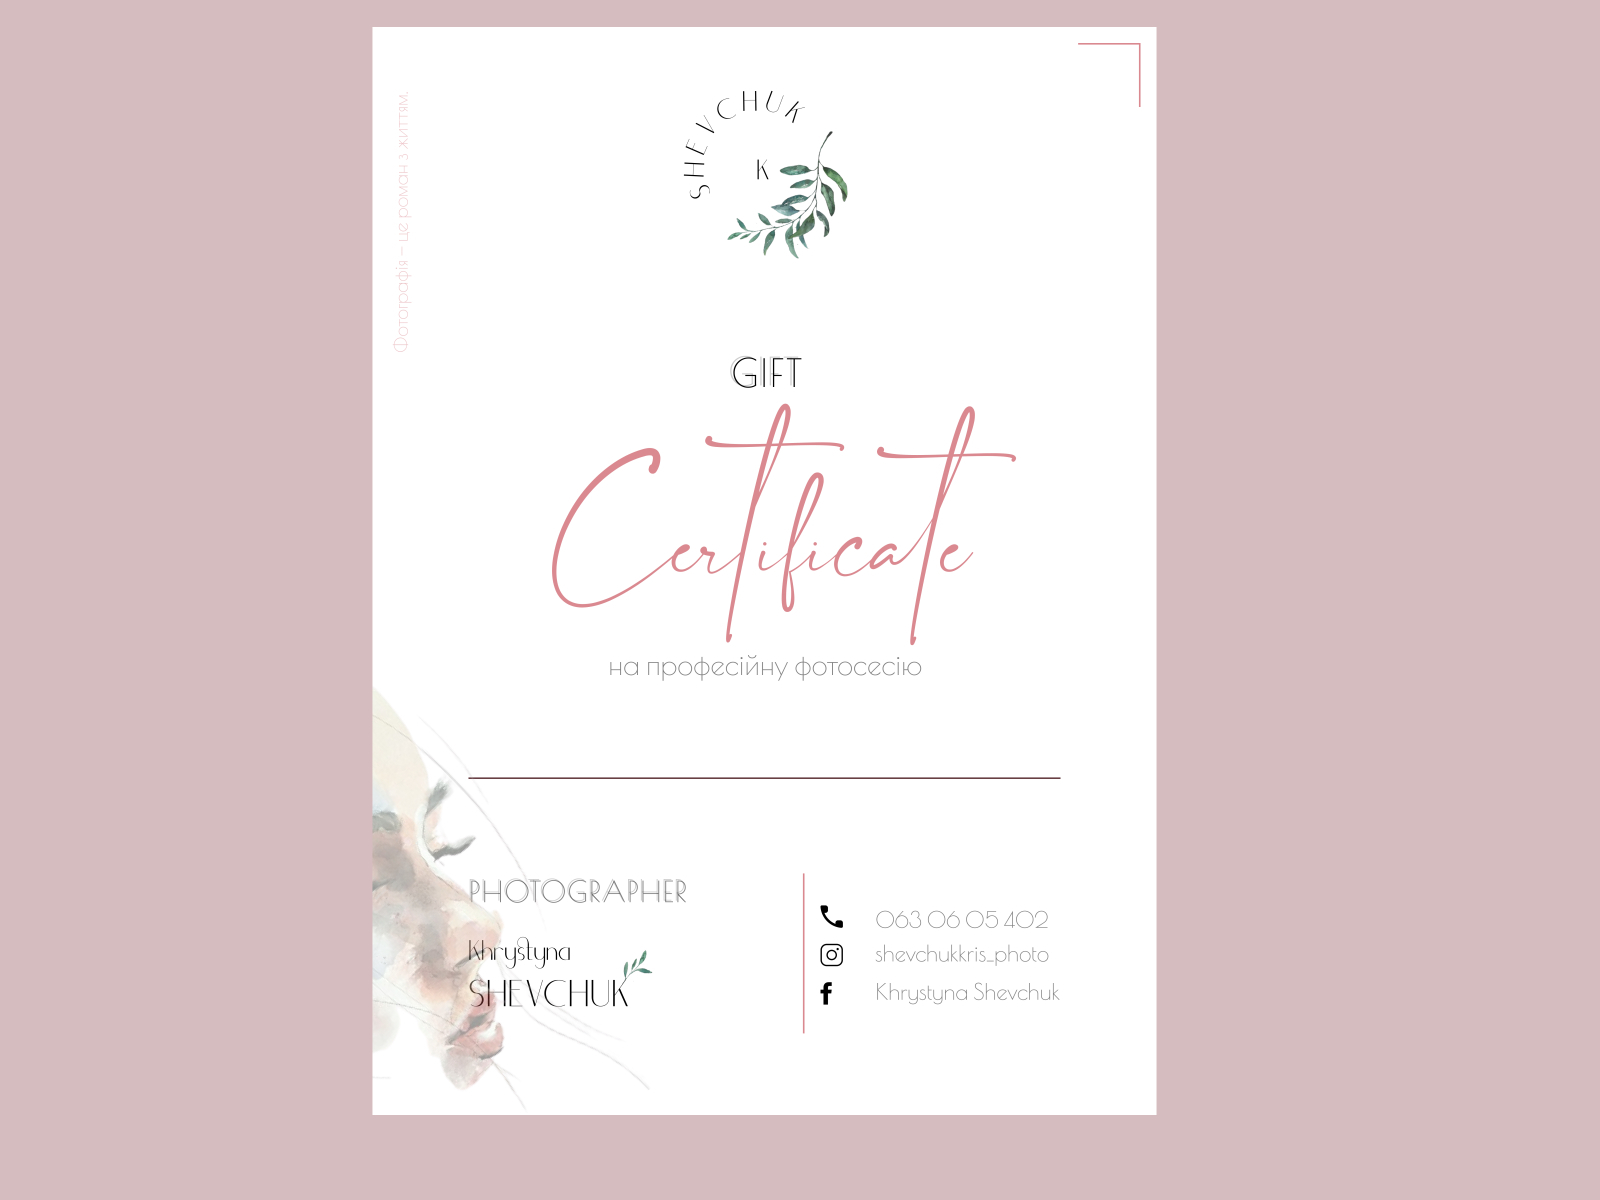 Gift certificate by Mariana Nadtochii on Dribbble